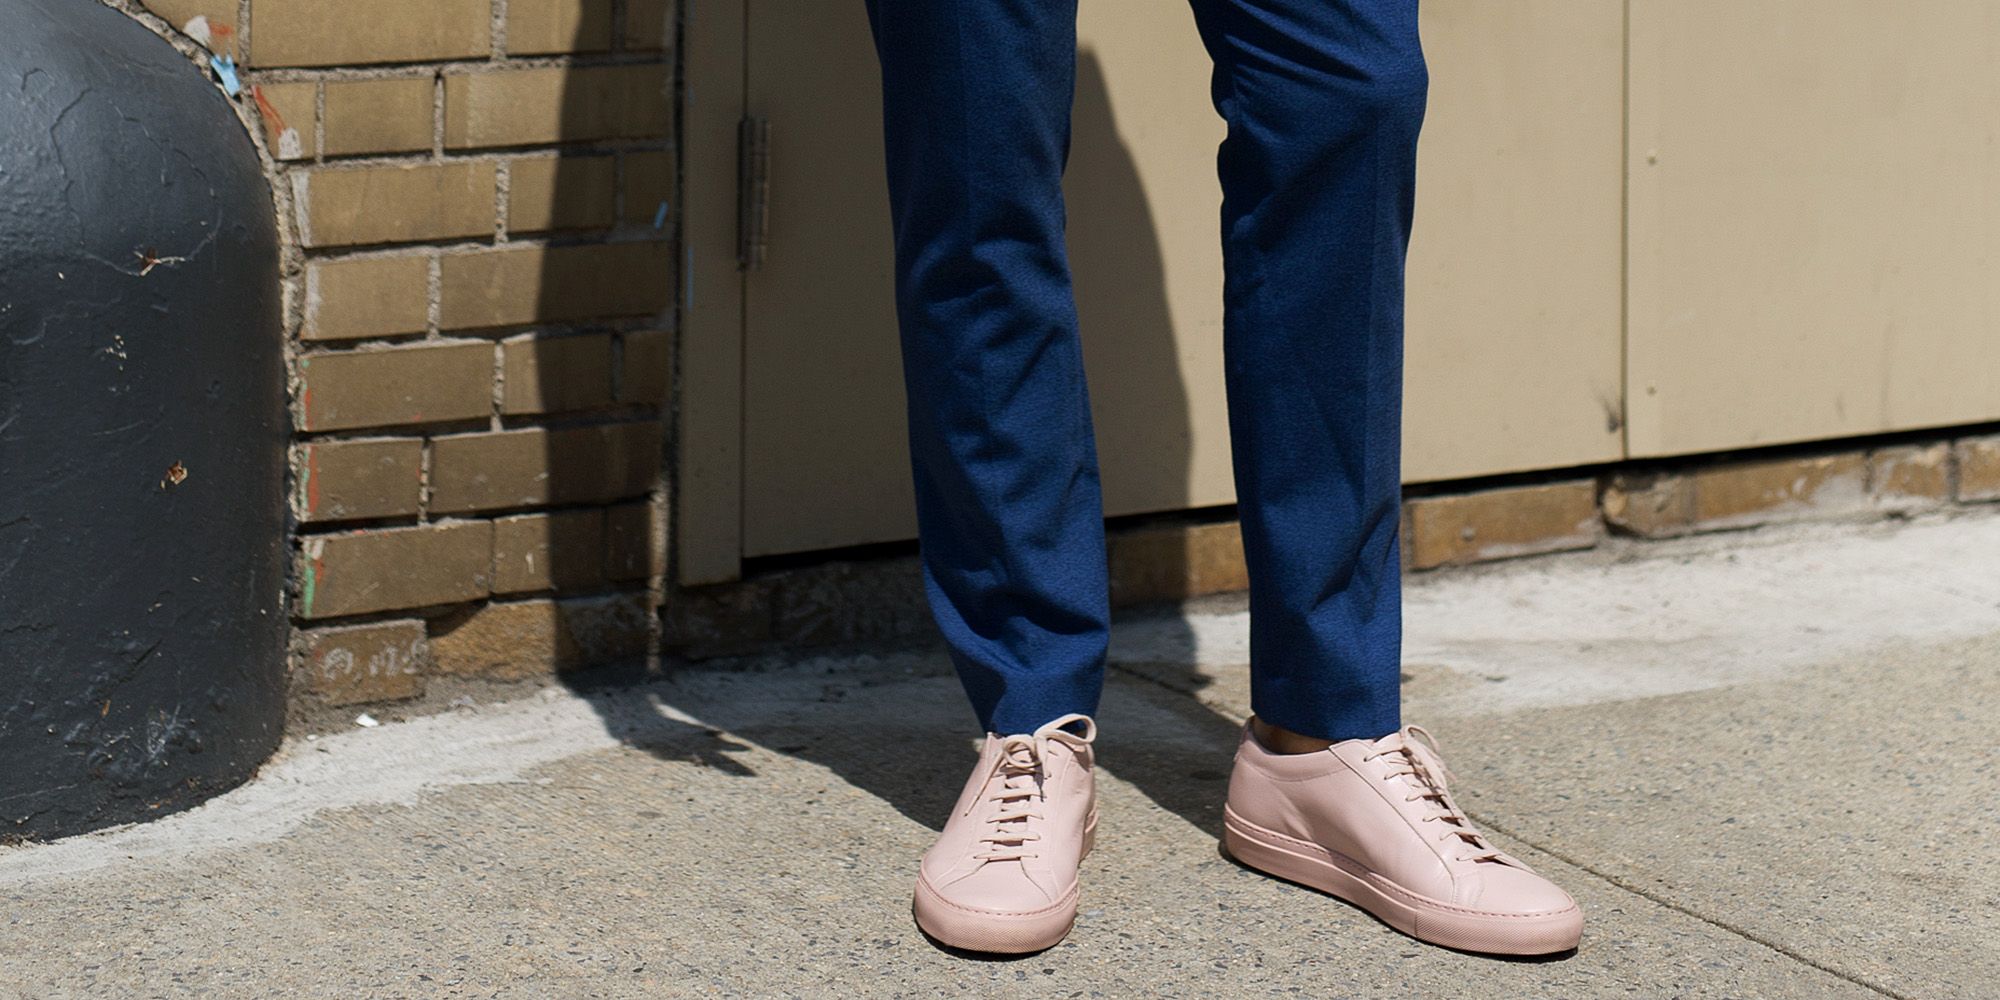 A Guide to Wearing Sneakers with Suits